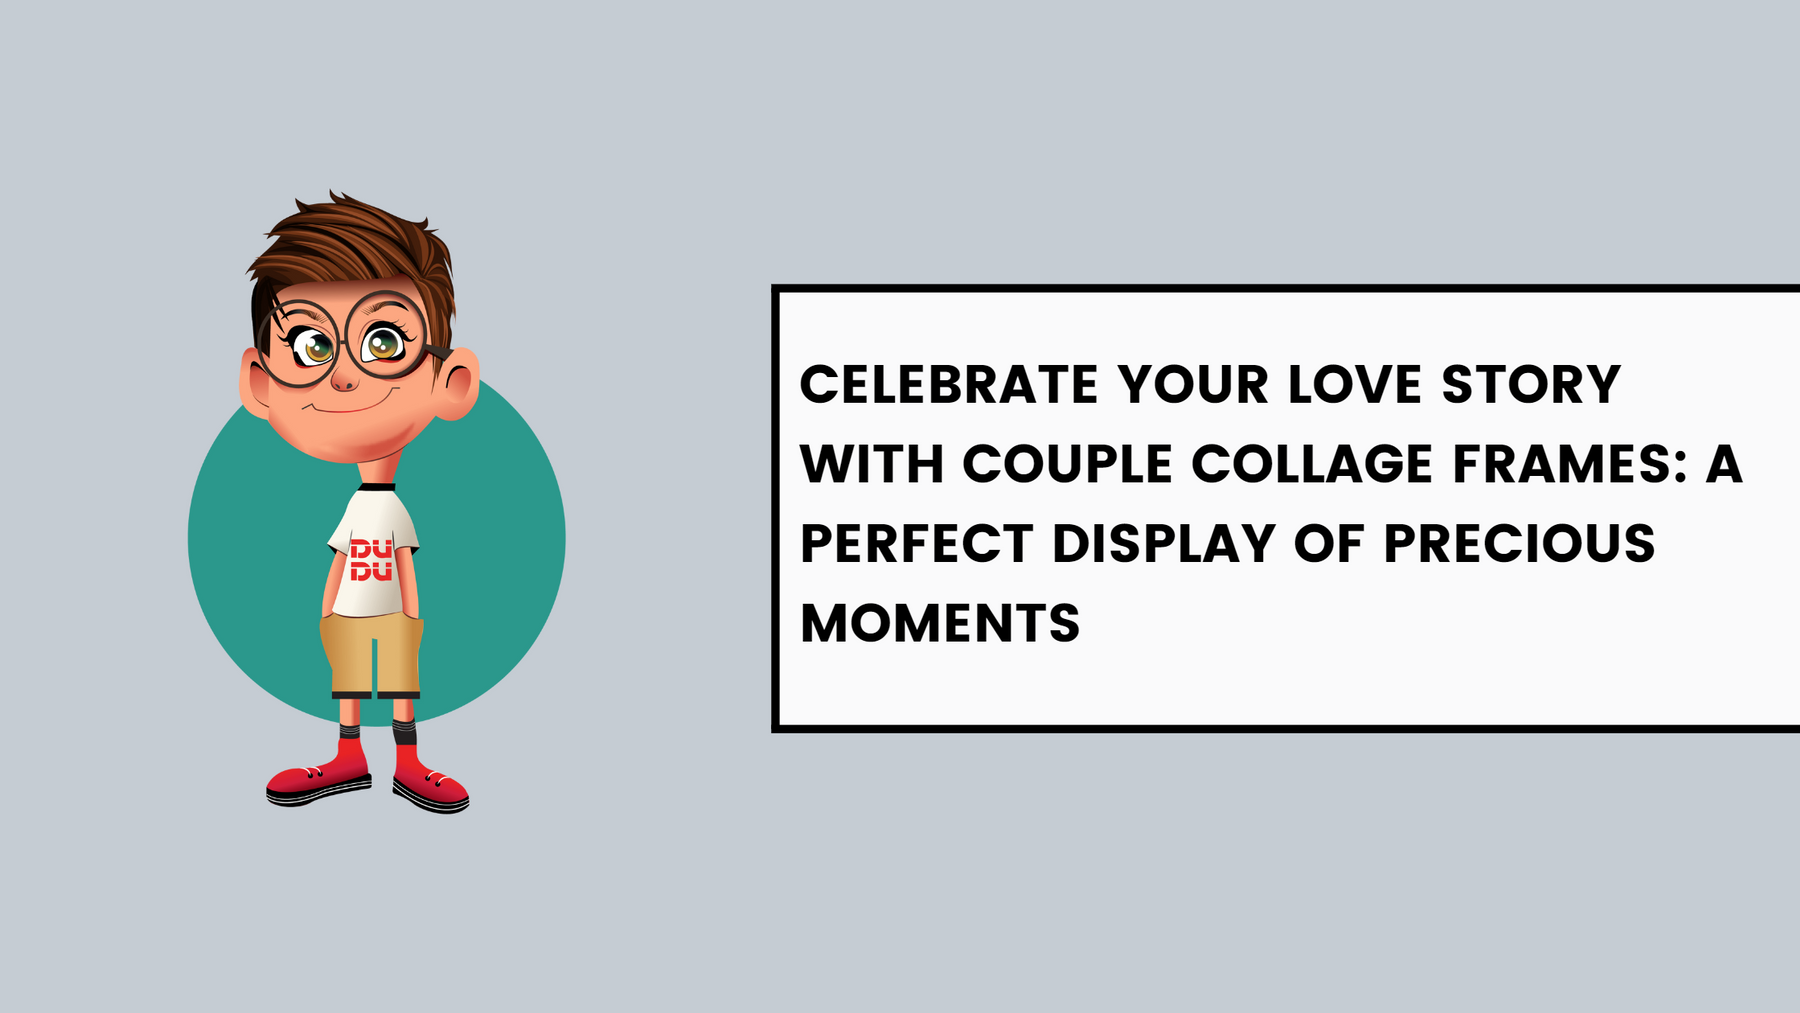 Celebrate Your Love Story with Couple Collage Frames: A Perfect Display of Precious Moments